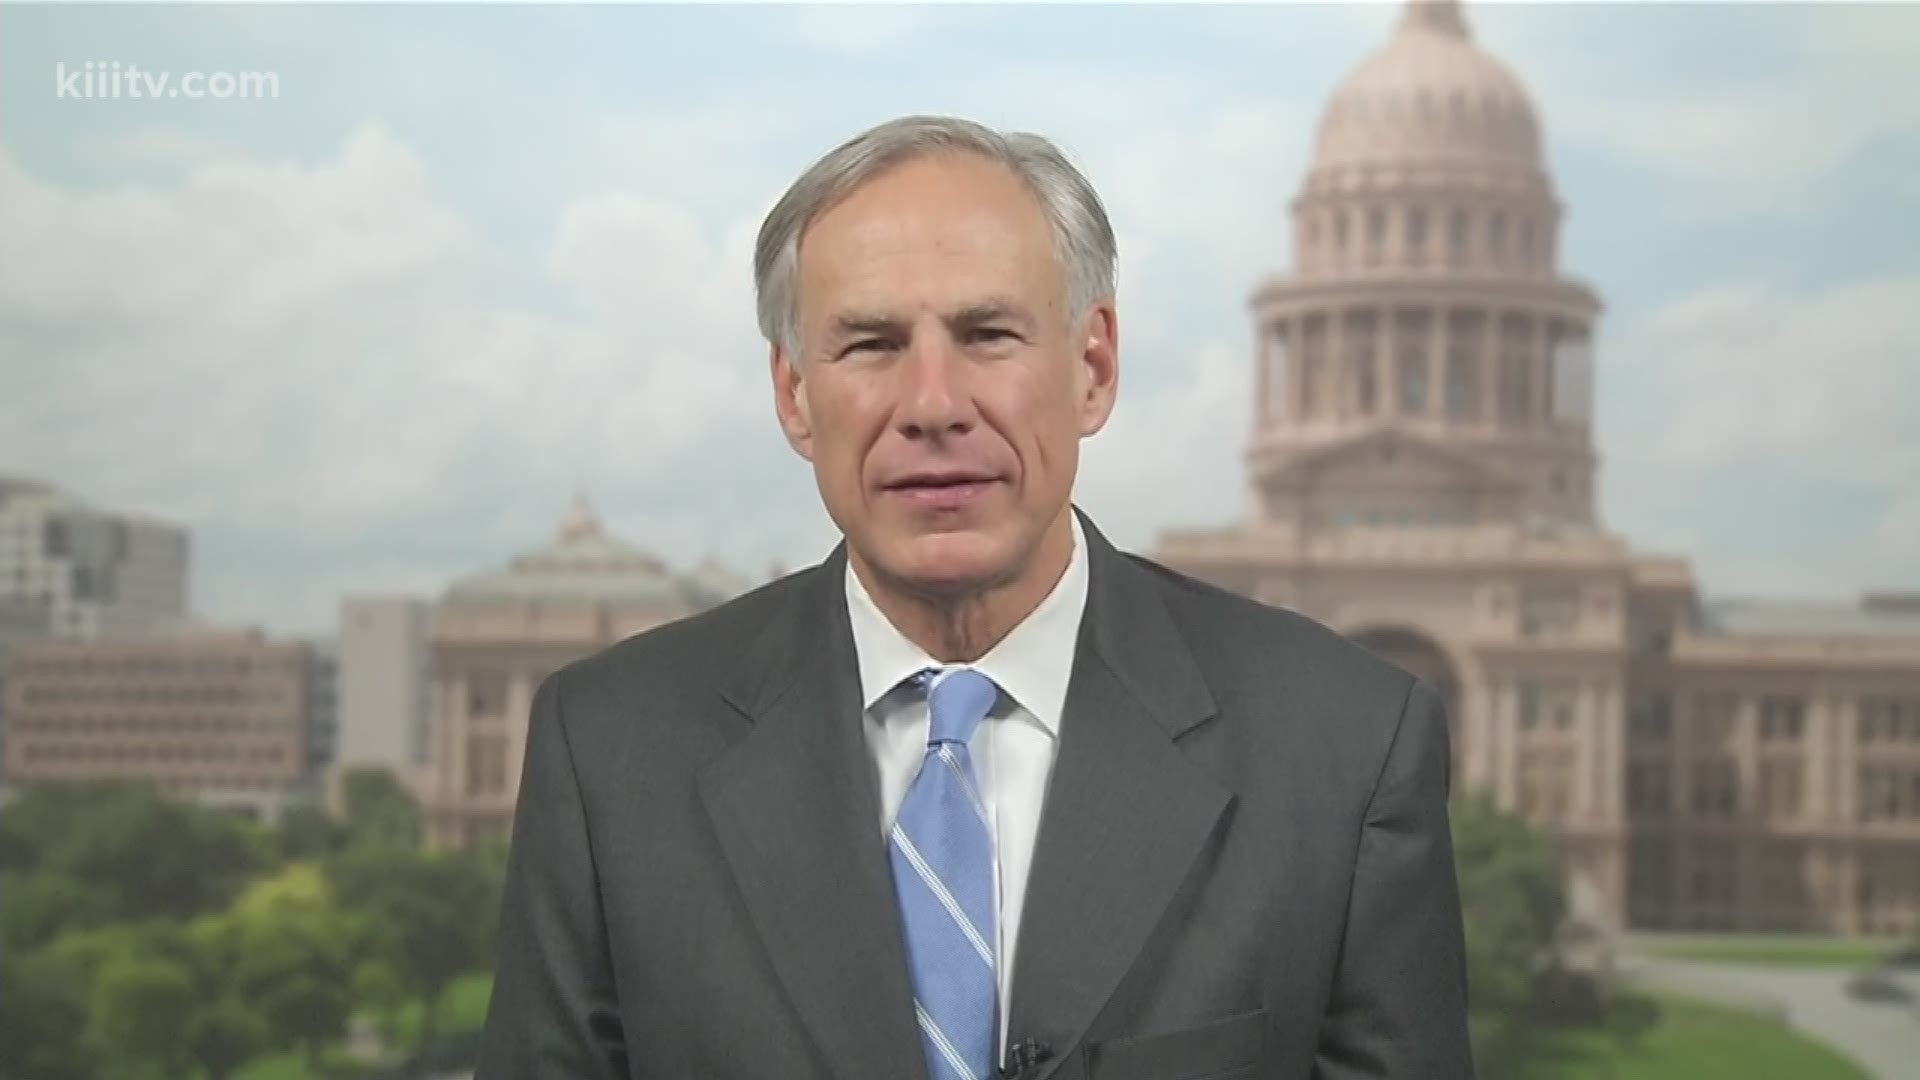 3News was in the state capitol for the start of the current legislative session, and on Thursday, Gov. Greg Abbott joined 3News at 5 p.m. Live from Austin to discuss his priorities for this session.